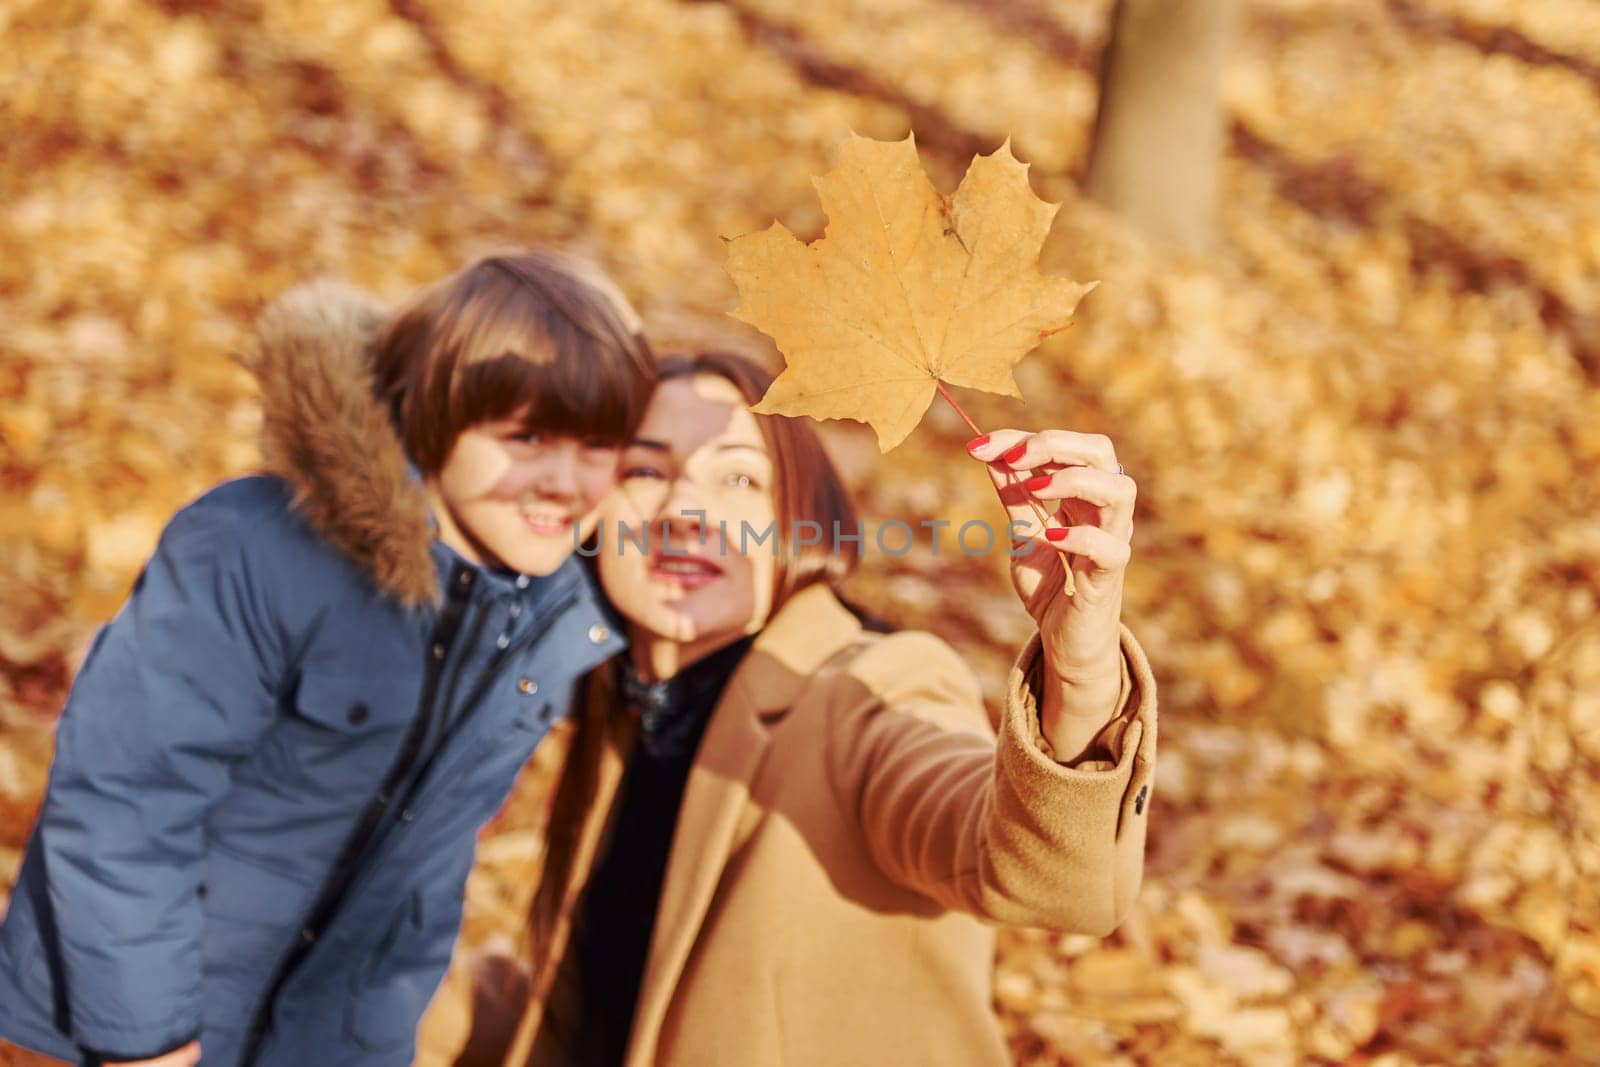 Looking at leaf. Mother with her son is having fun outdoors in the autumn forest by Standret